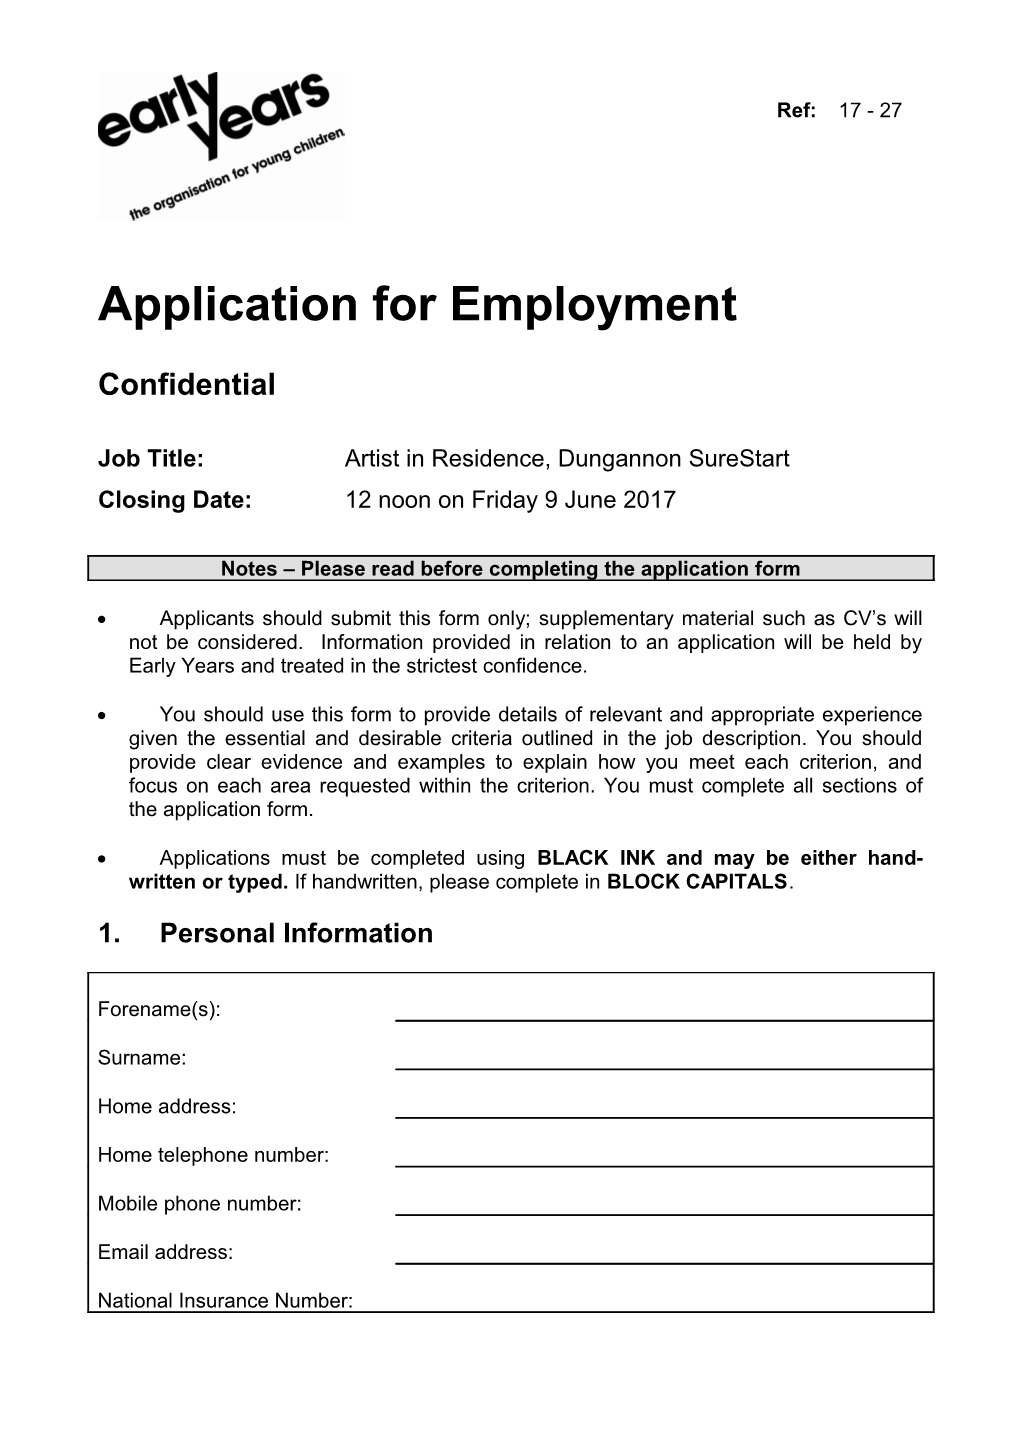 Application for Employment s35